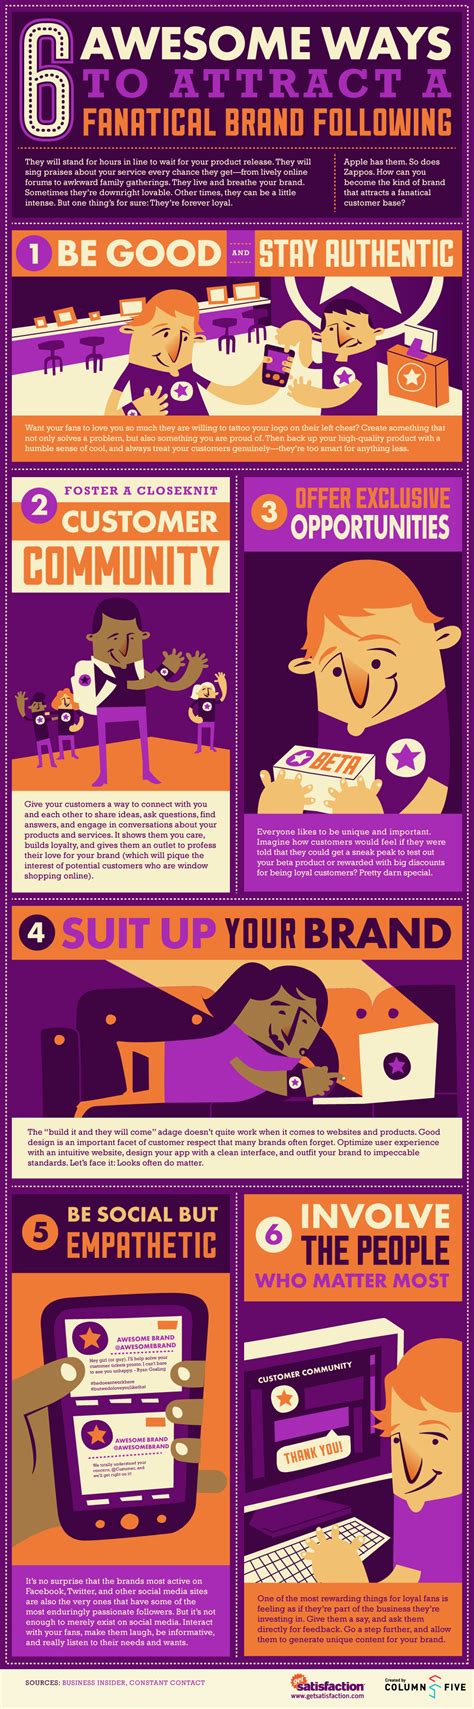 Unique Infographic Design, 6 Ways to Attract Brand Fanatics @BWKuykendall #Infographic #Design ...